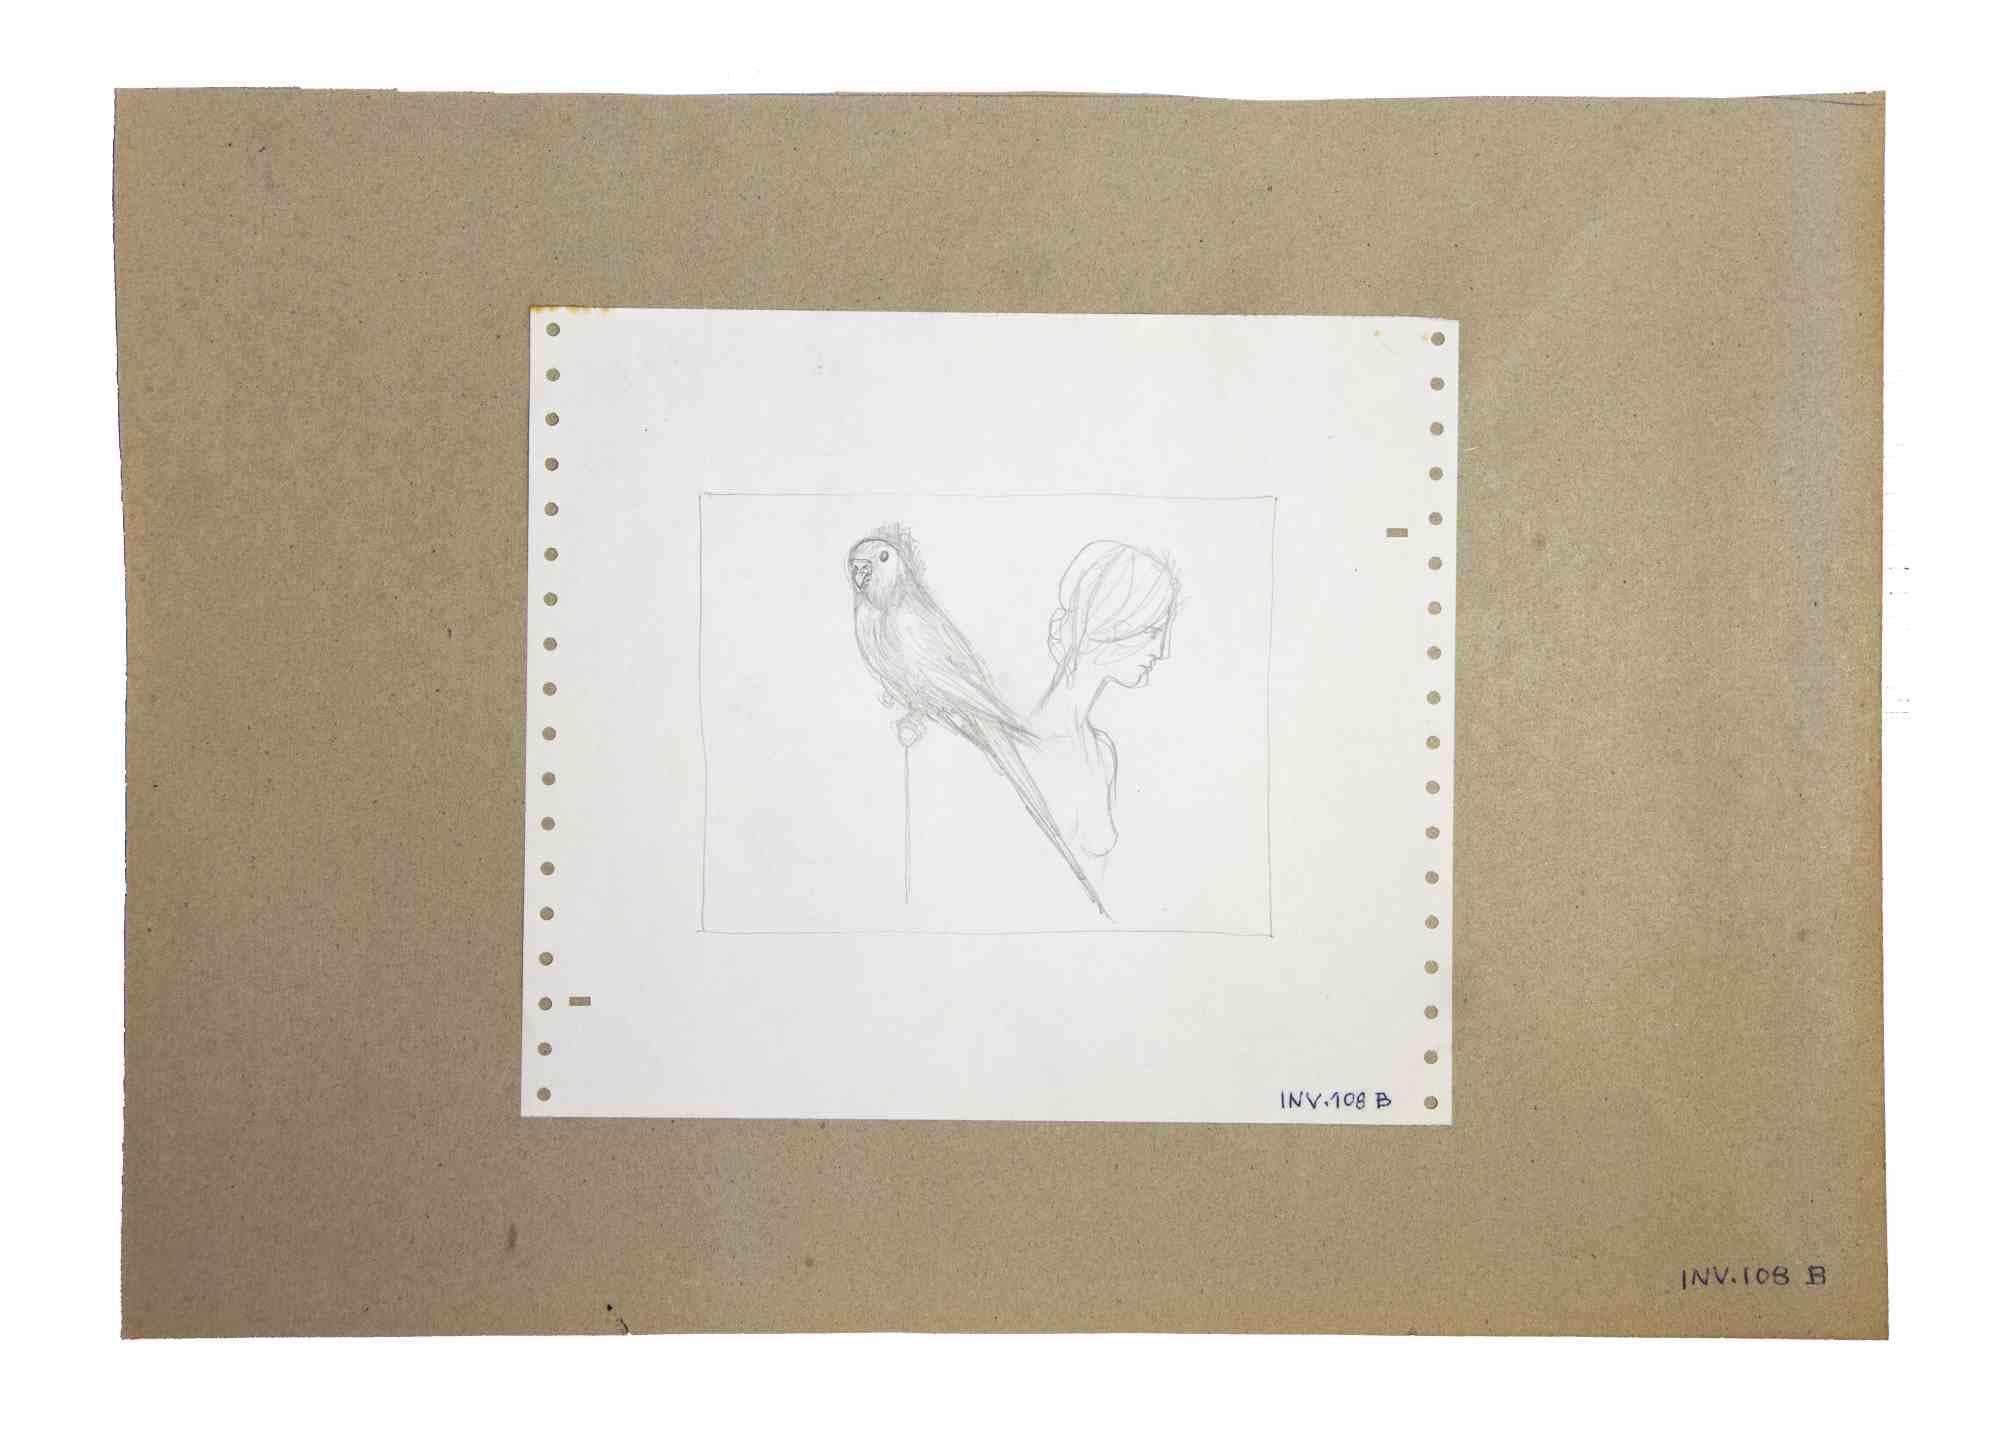 The Nude and Parrot is an original Contemporary artwork realized in the 1970s. by the Italian Contemporary artist  Leo Guida  (1992 - 2017).

Original drawing in pencil on ivory-colored paper, with another drawing on the rear, which represents a